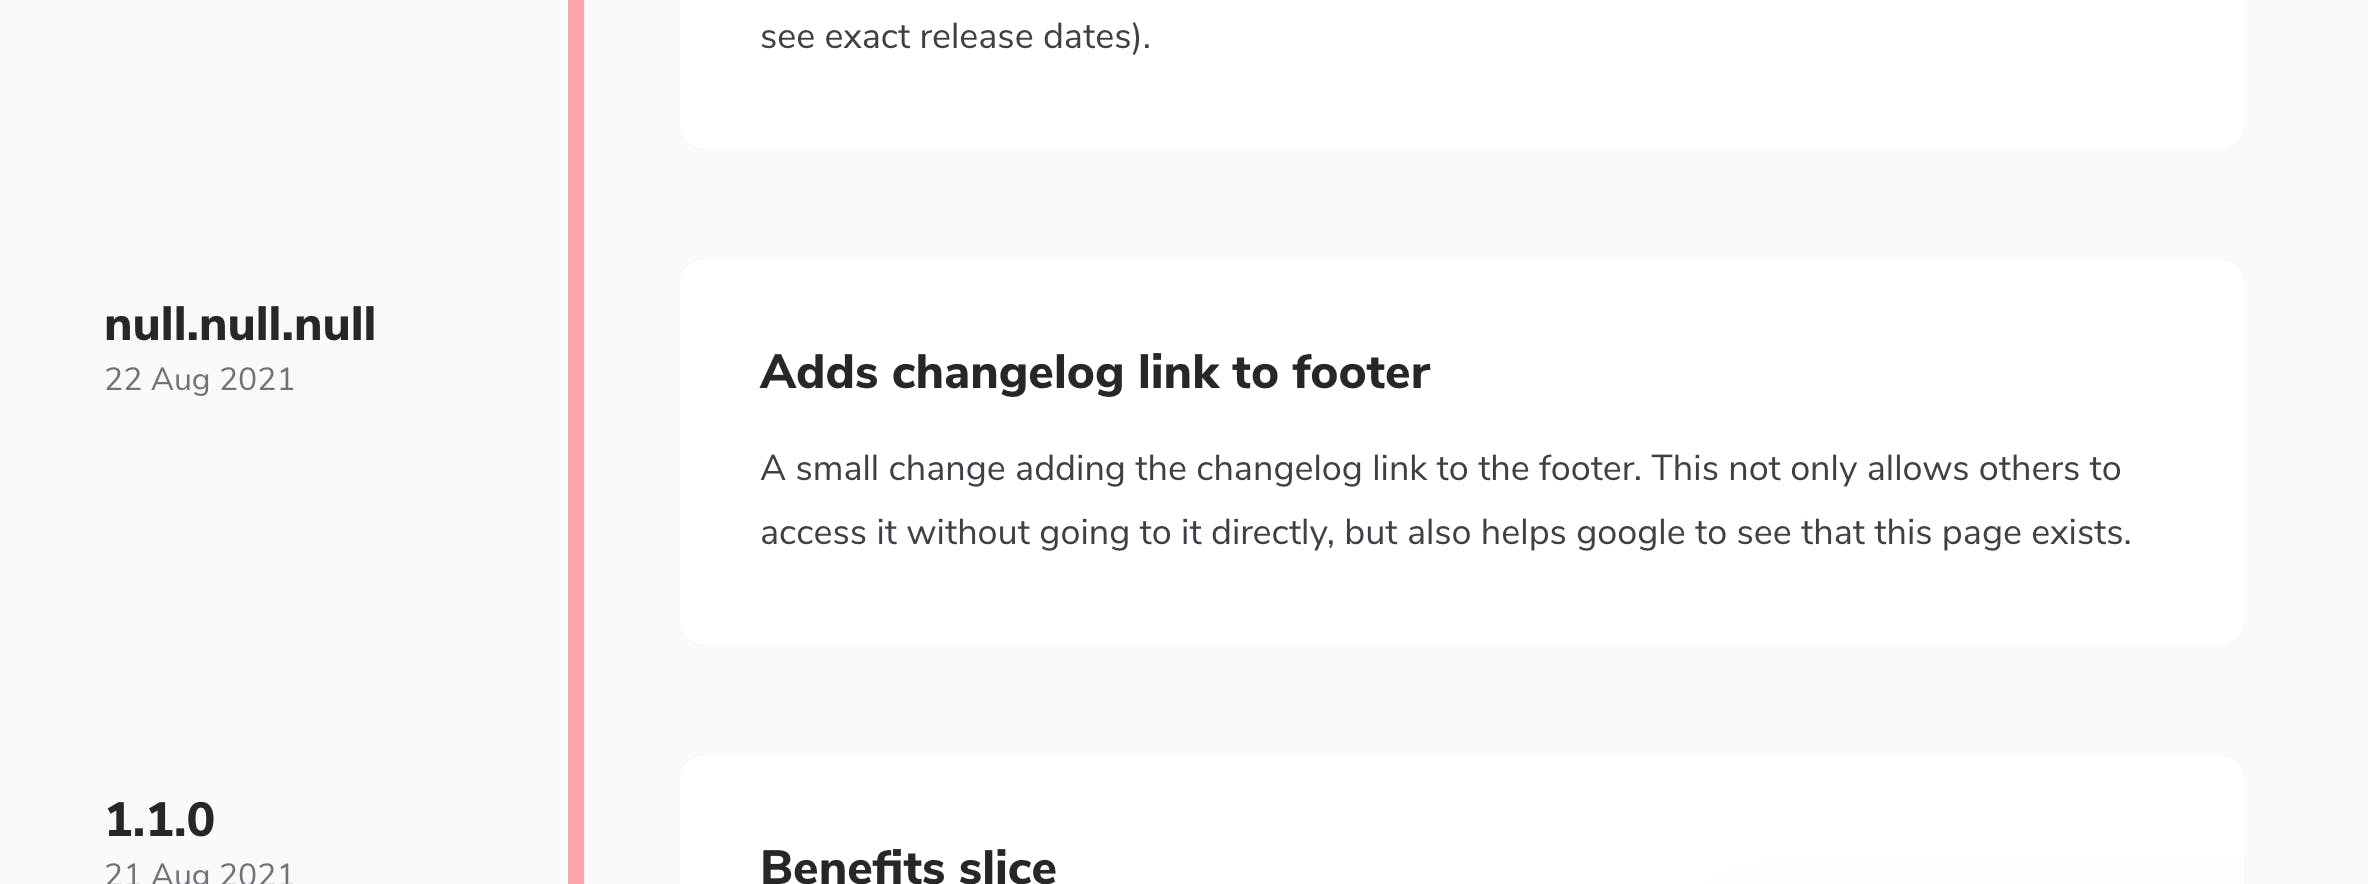 Shows issue where changelog is displayed without version numbers which shows as "null.null.null"